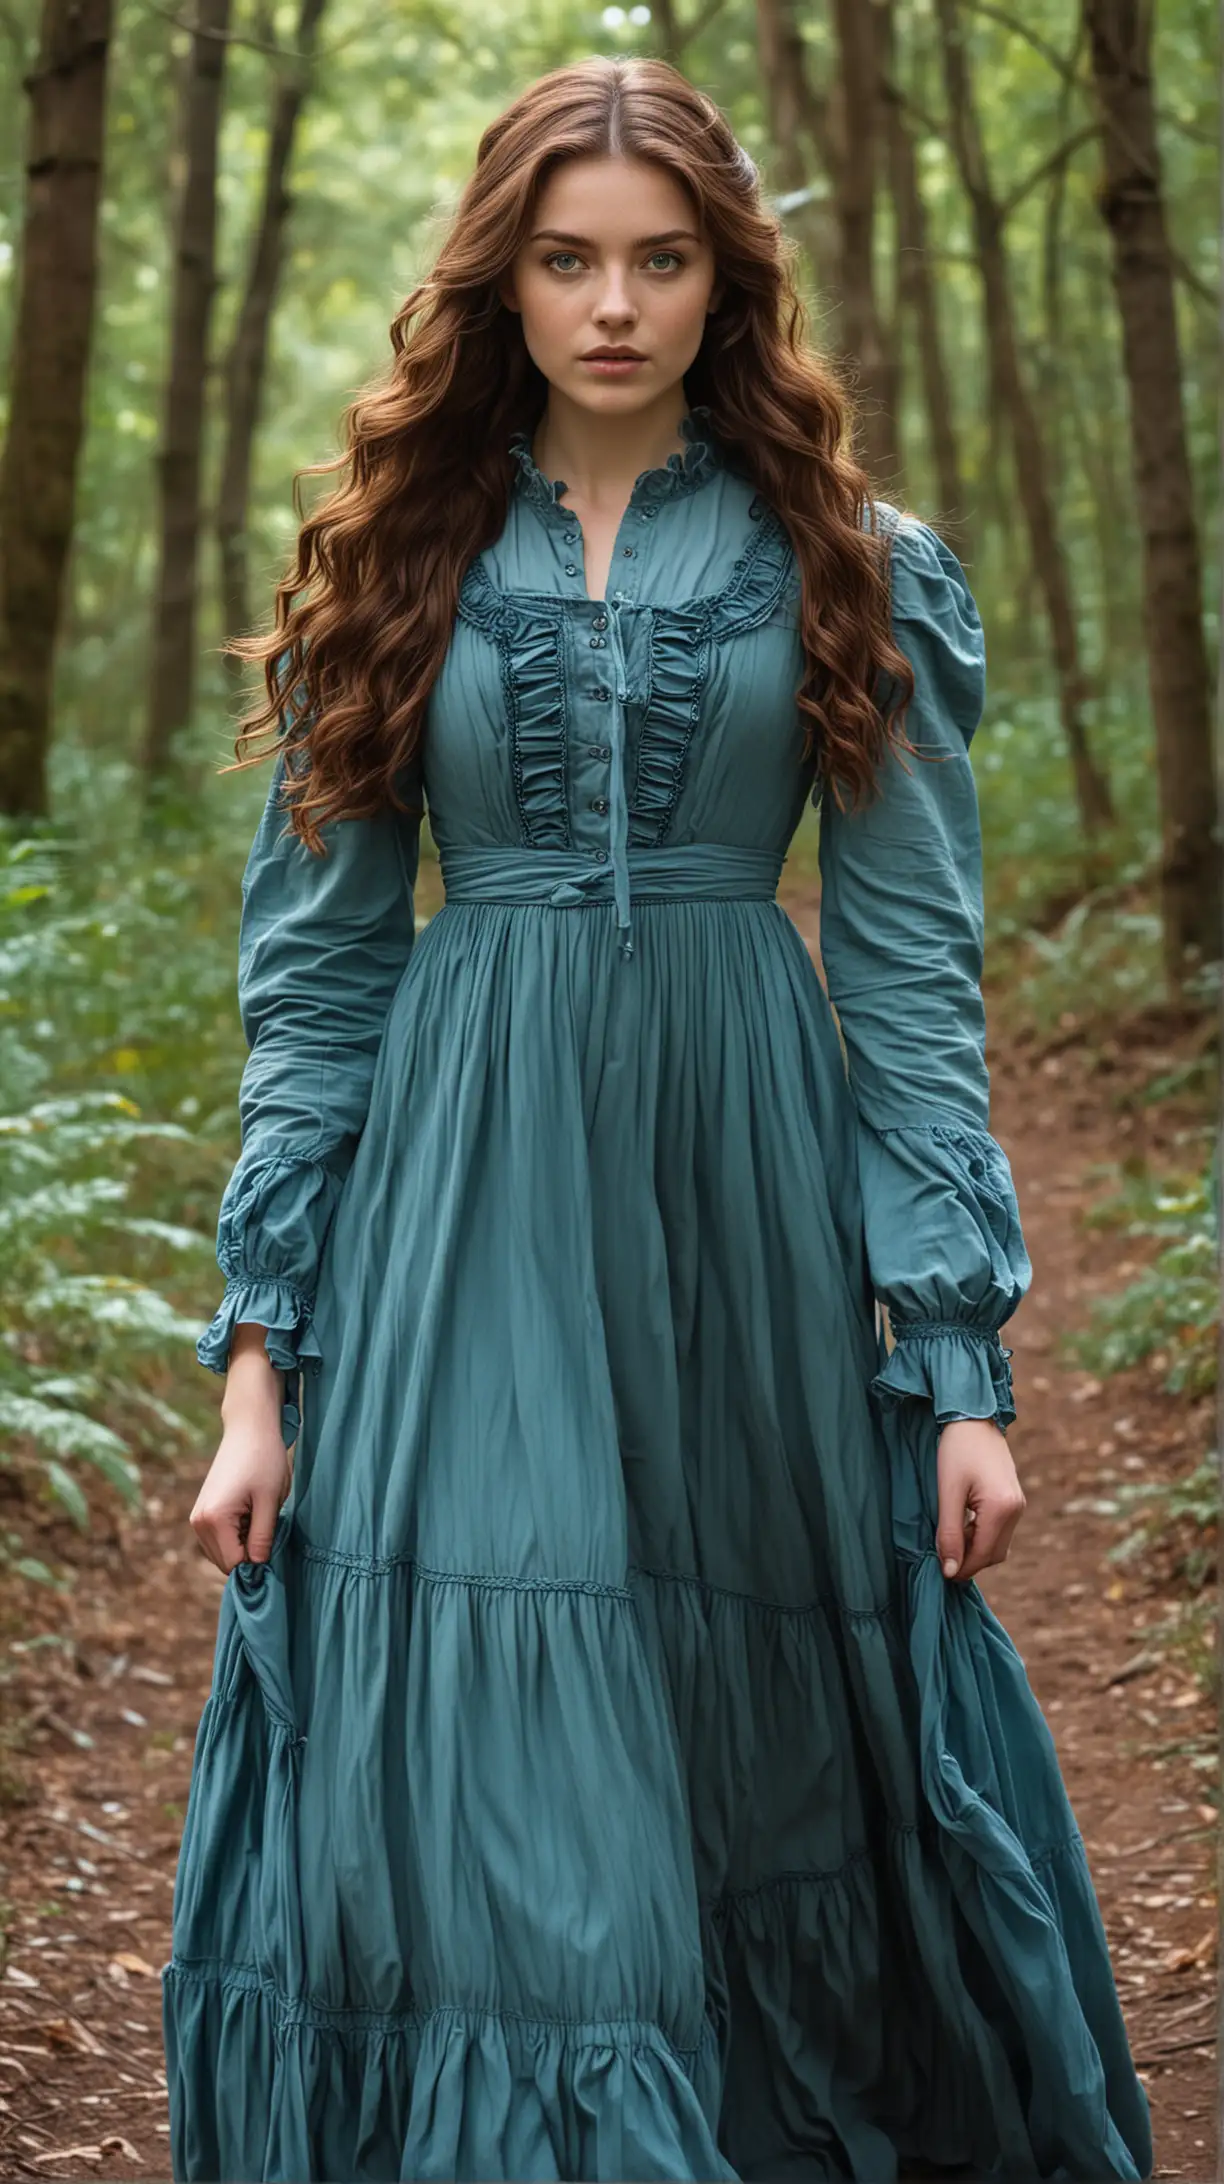 Young Woman in Blue Victorian Dress Strolling Through Enchanted Forest